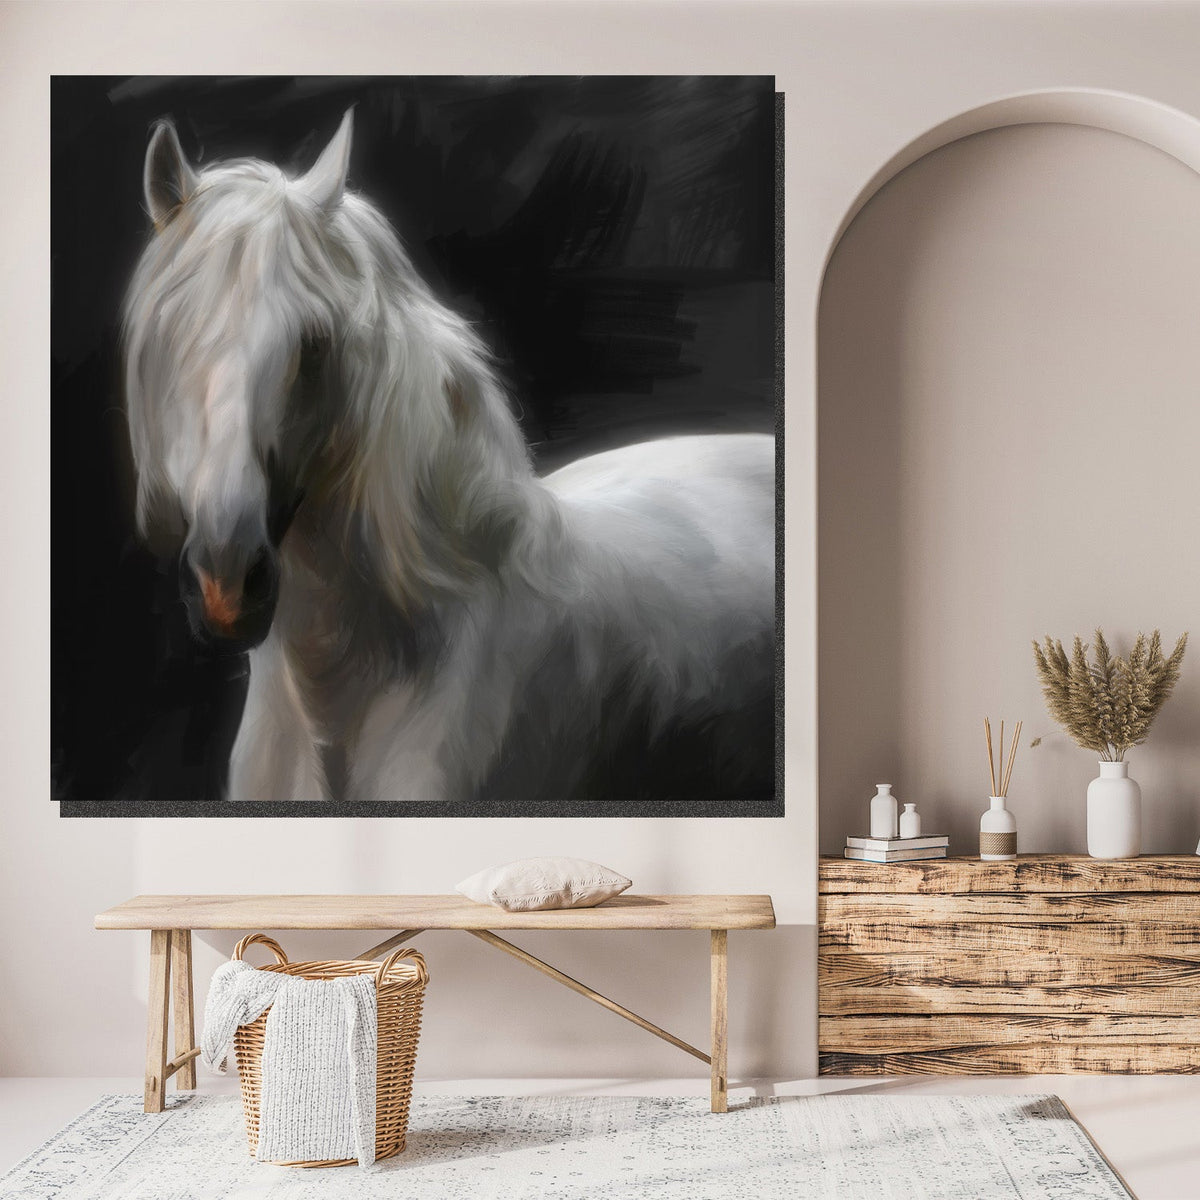 https://cdn.shopify.com/s/files/1/0387/9986/8044/products/AndalusianHorseCanvasArtprintStretched-2.jpg